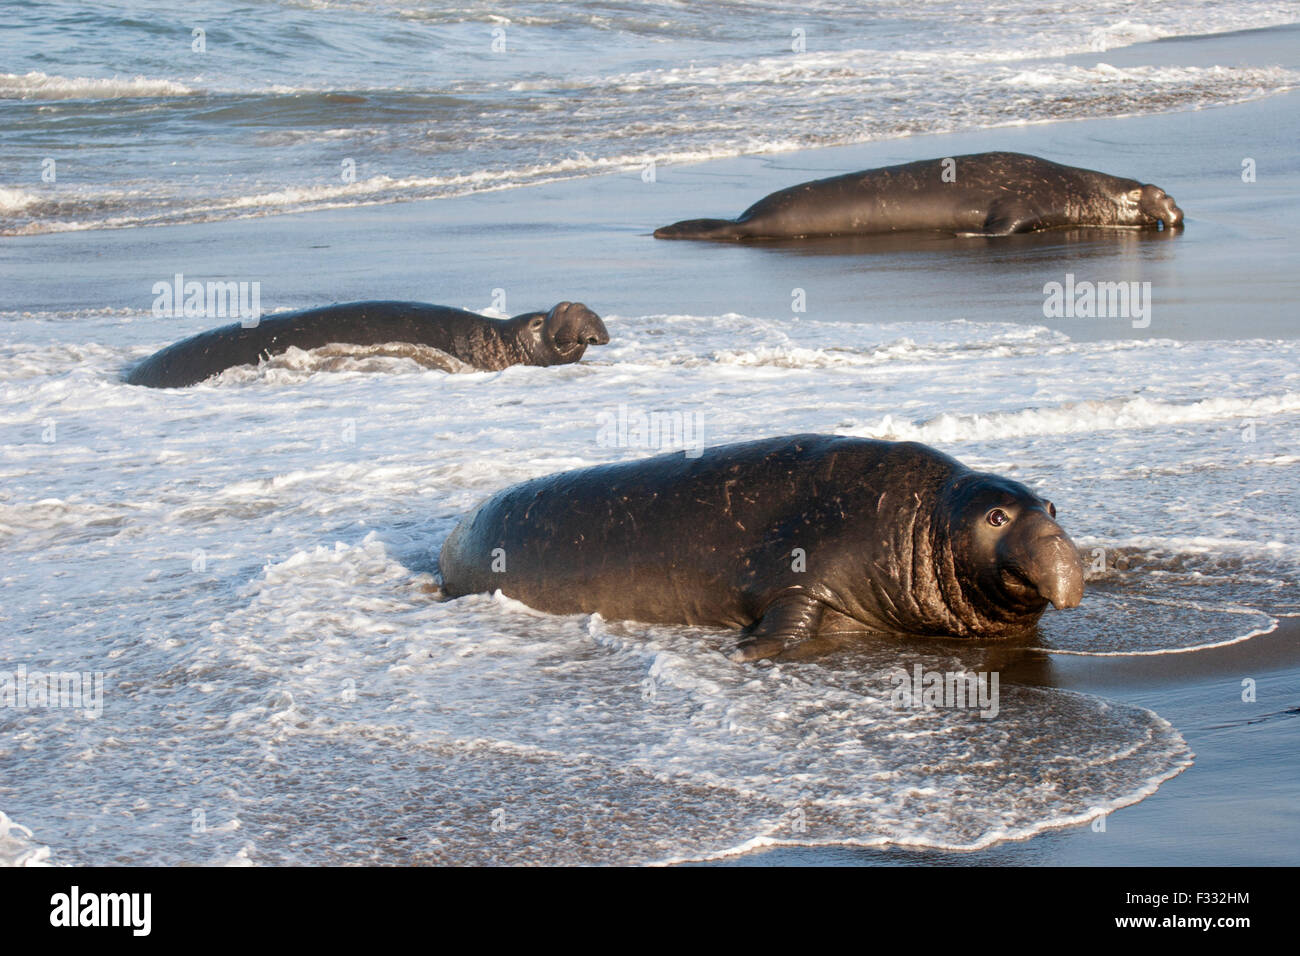 Northern elephant seals (Mirounga angustirostris) dominant males emerging from the ocean water on a California coast. Stock Photo